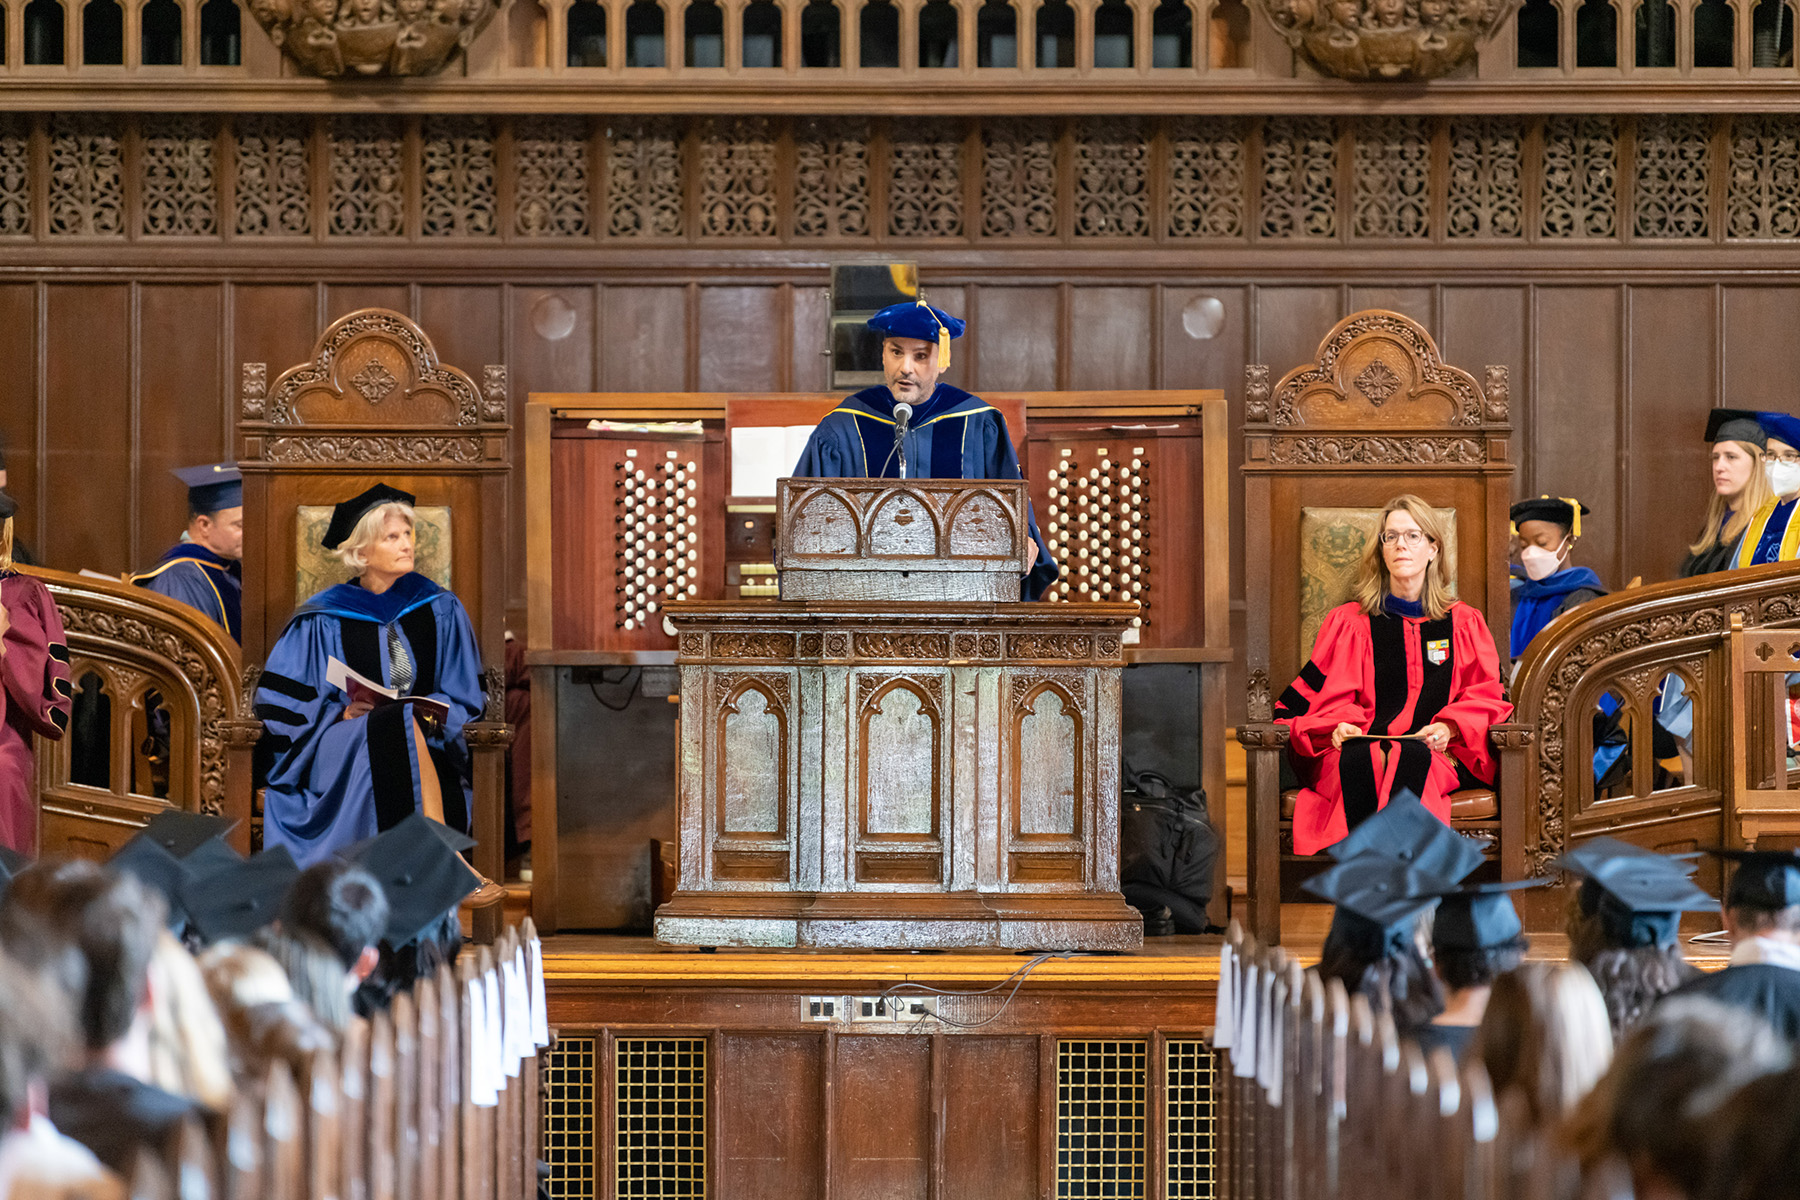 Dean of the College Carlos Alamo-Pastrana speaks at an ornate wooden podium, with members of the Vassar administration and faculty on both sides.